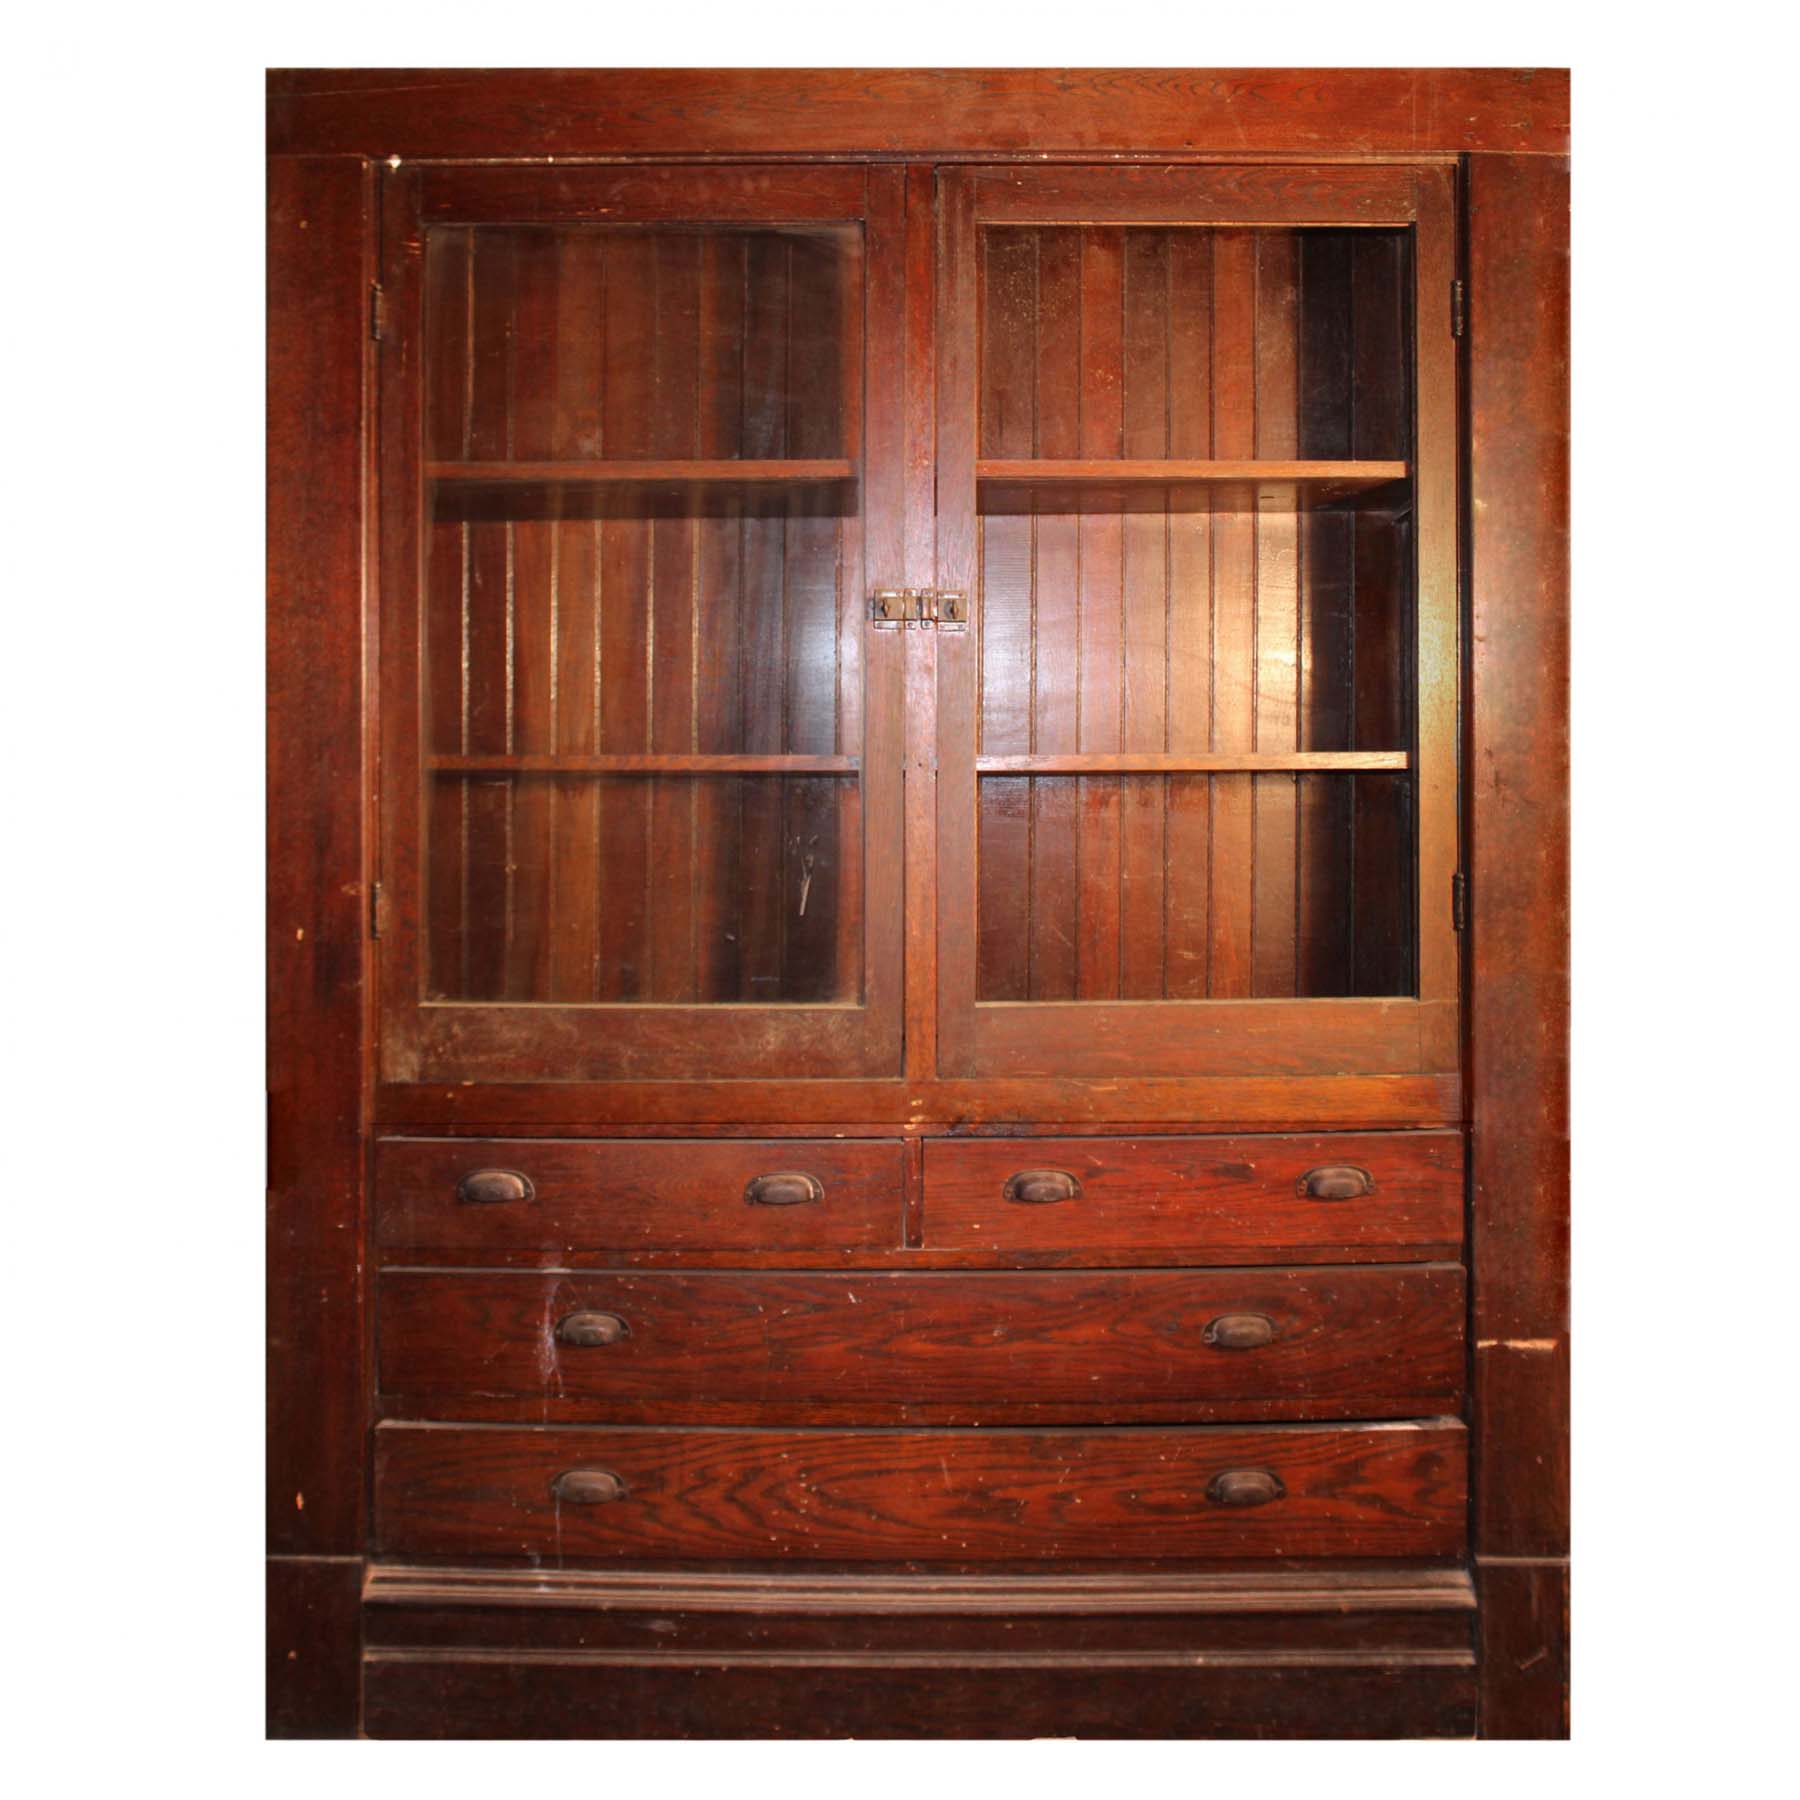 New Antique Kitchen Pantry Cabinet For Sale for Simple Design